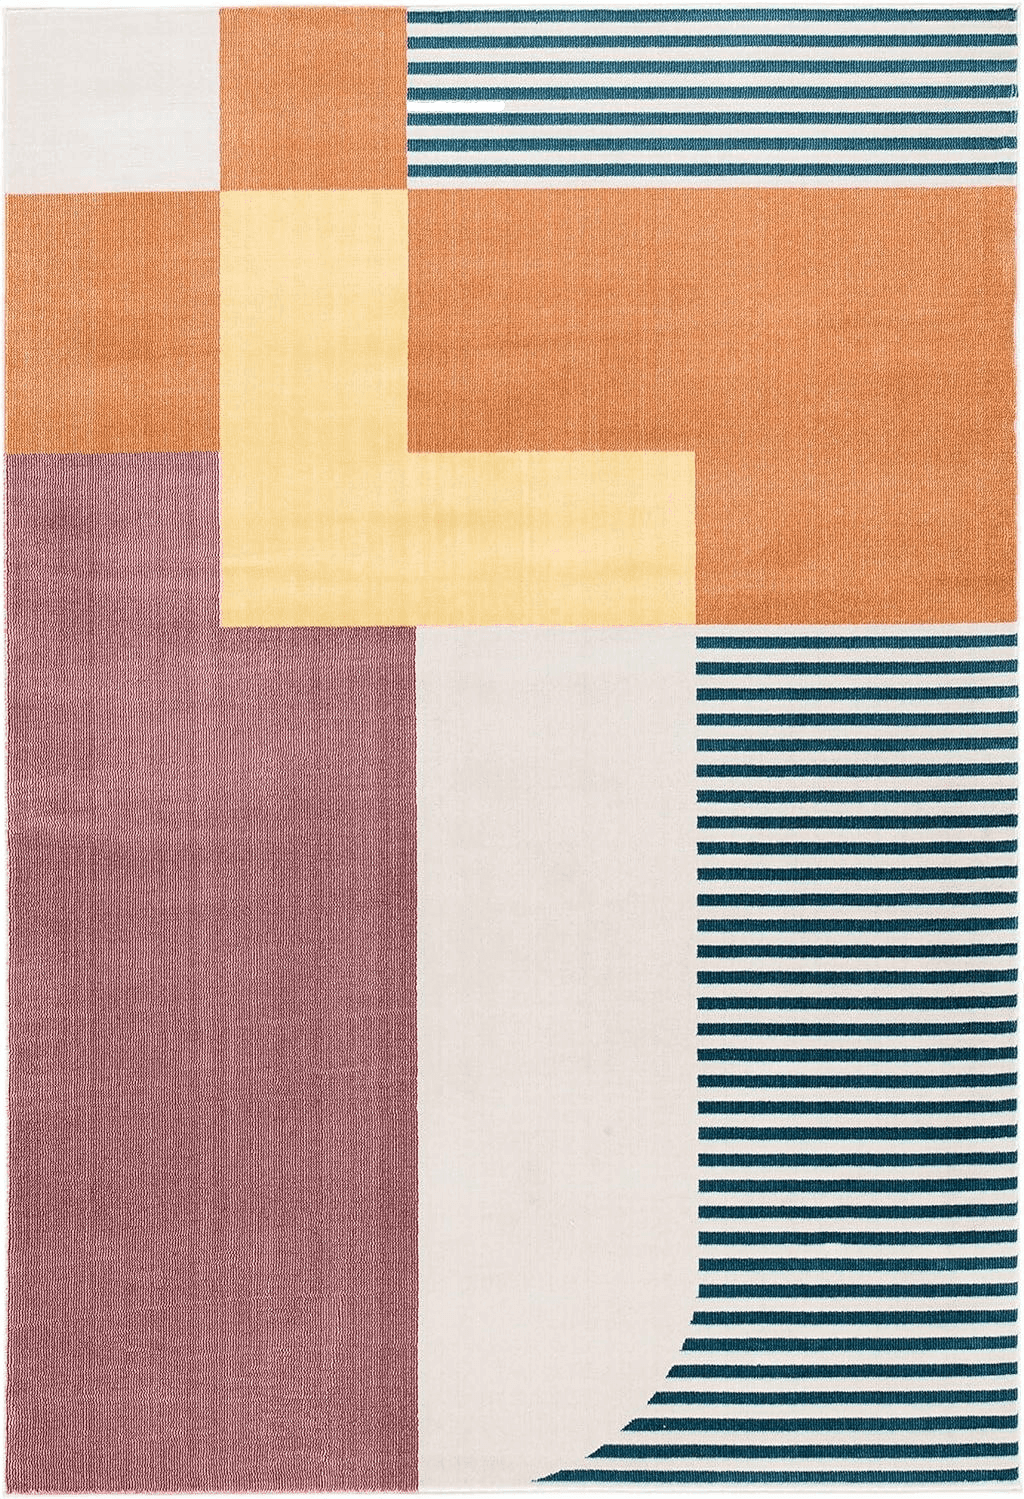 SAFAVIEH Orwell Collection Area Rug - 8' x 10', Rust & Yellow, Mid-Century Modern Abstract Design, Non-Shedding & Easy Care, Ideal for High Traffic Areas in Living Room, Bedroom (ORW368P)